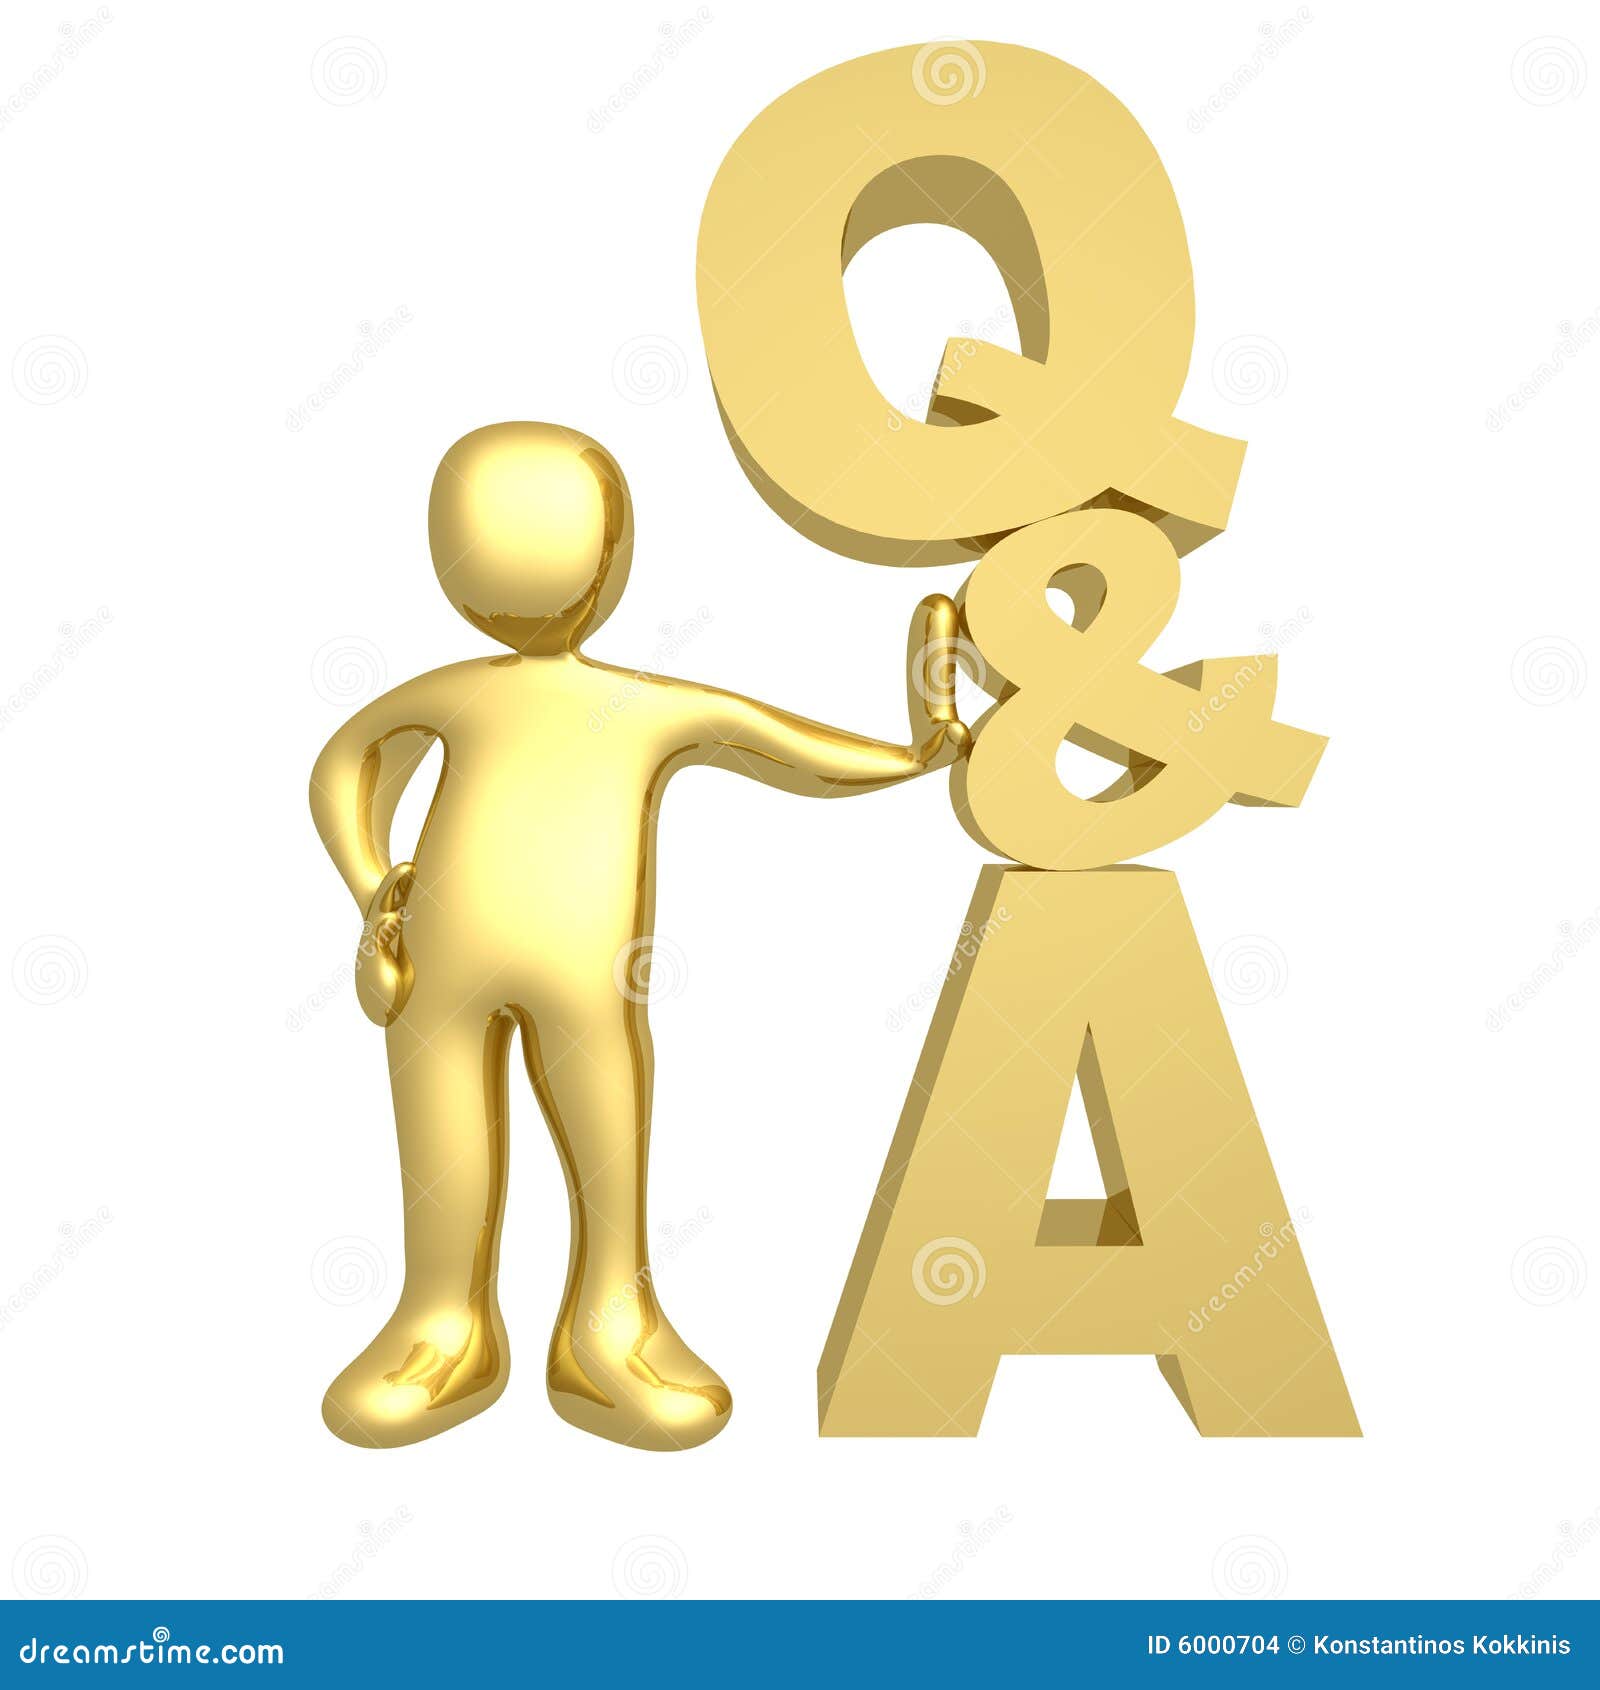 clipart of question and answer - photo #33